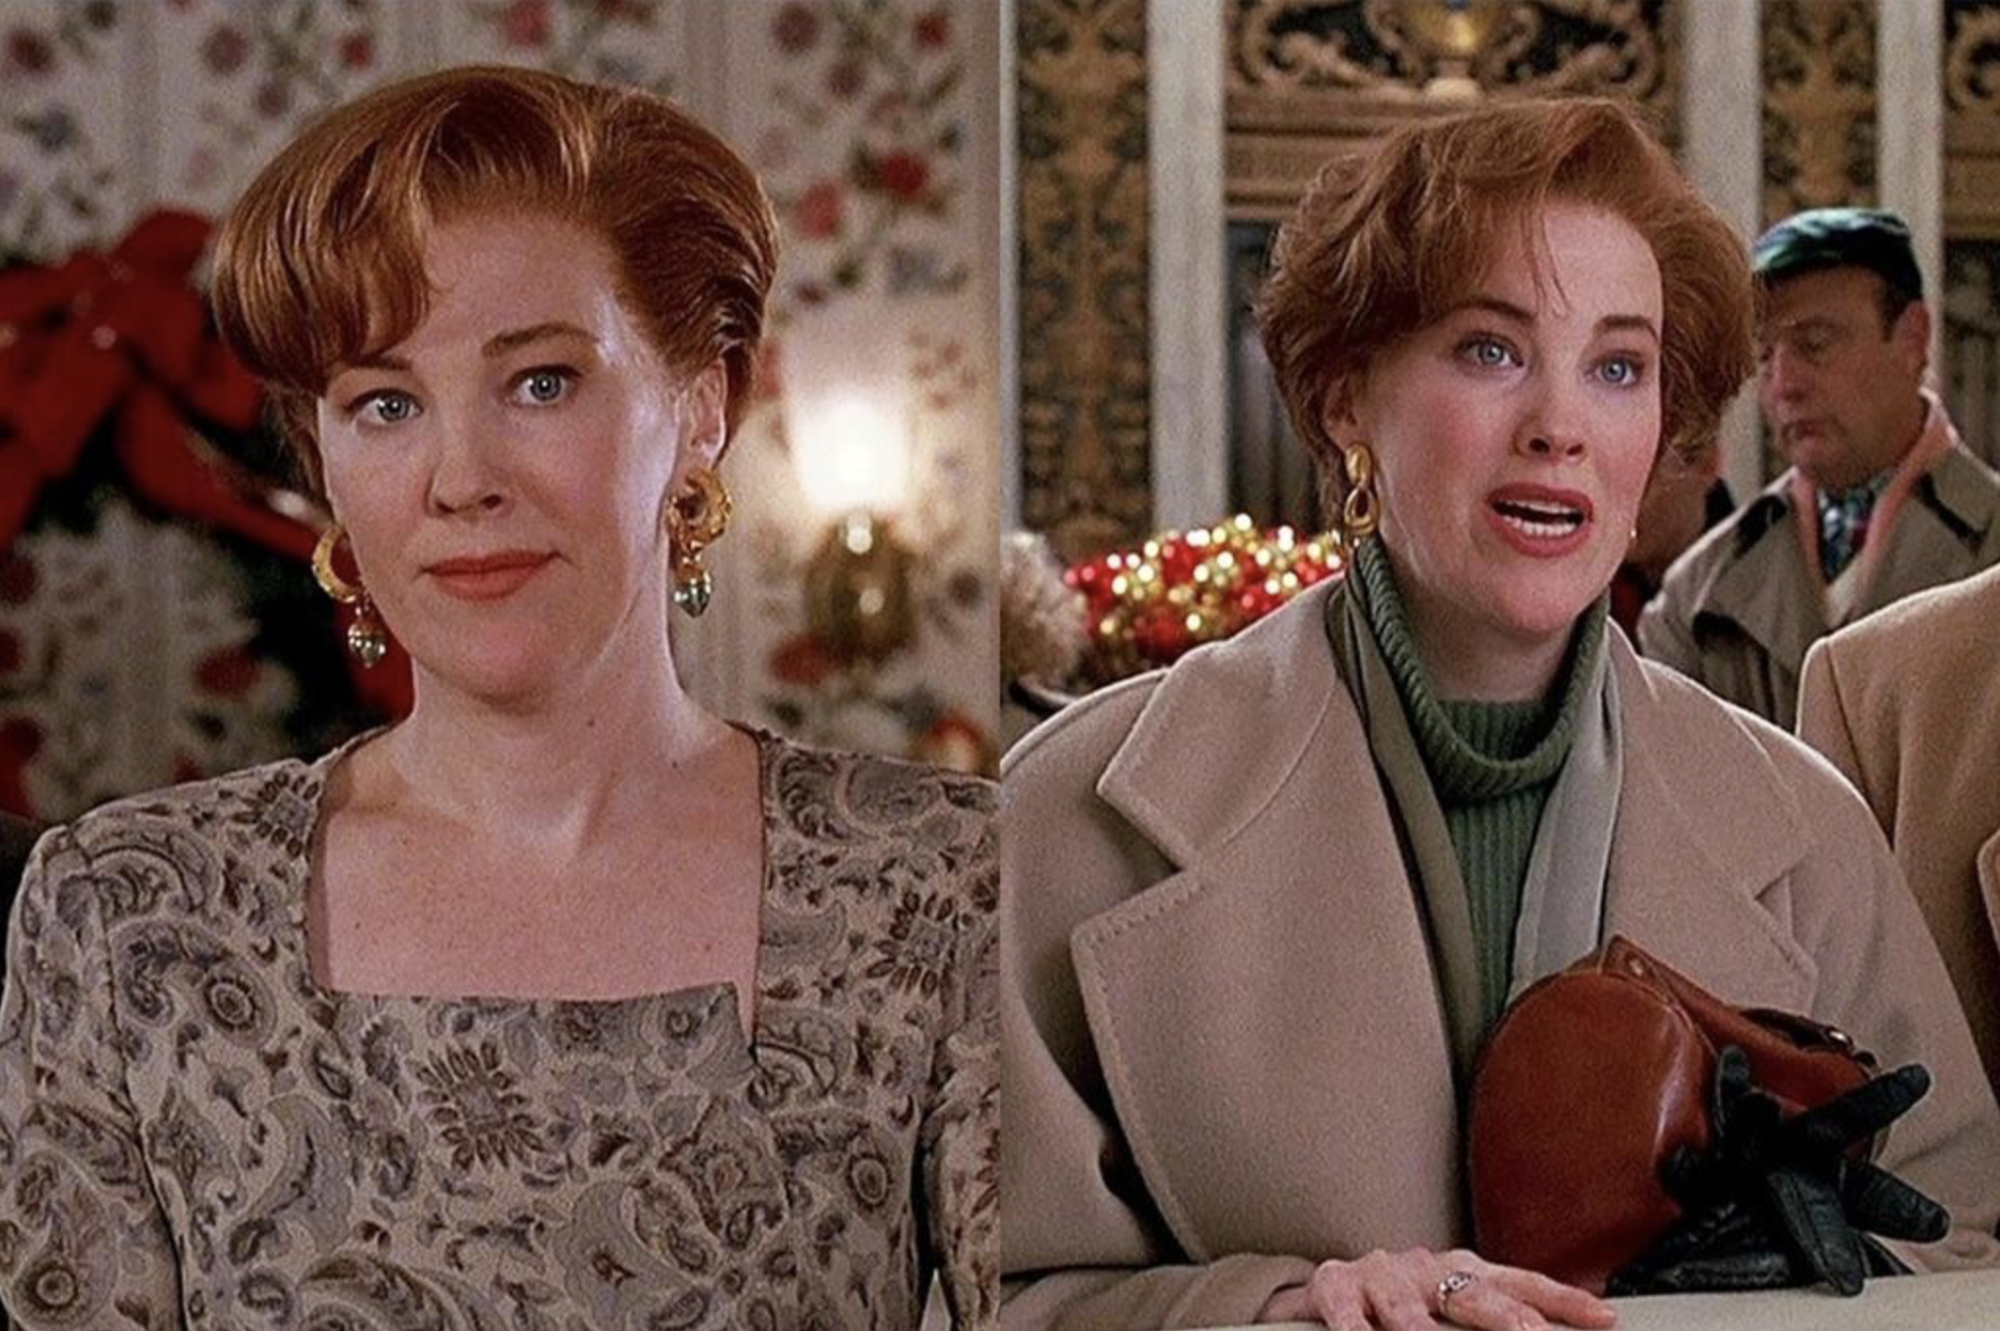 The 10 most stylish heroines of Christmas movies: their images inspire. Photo